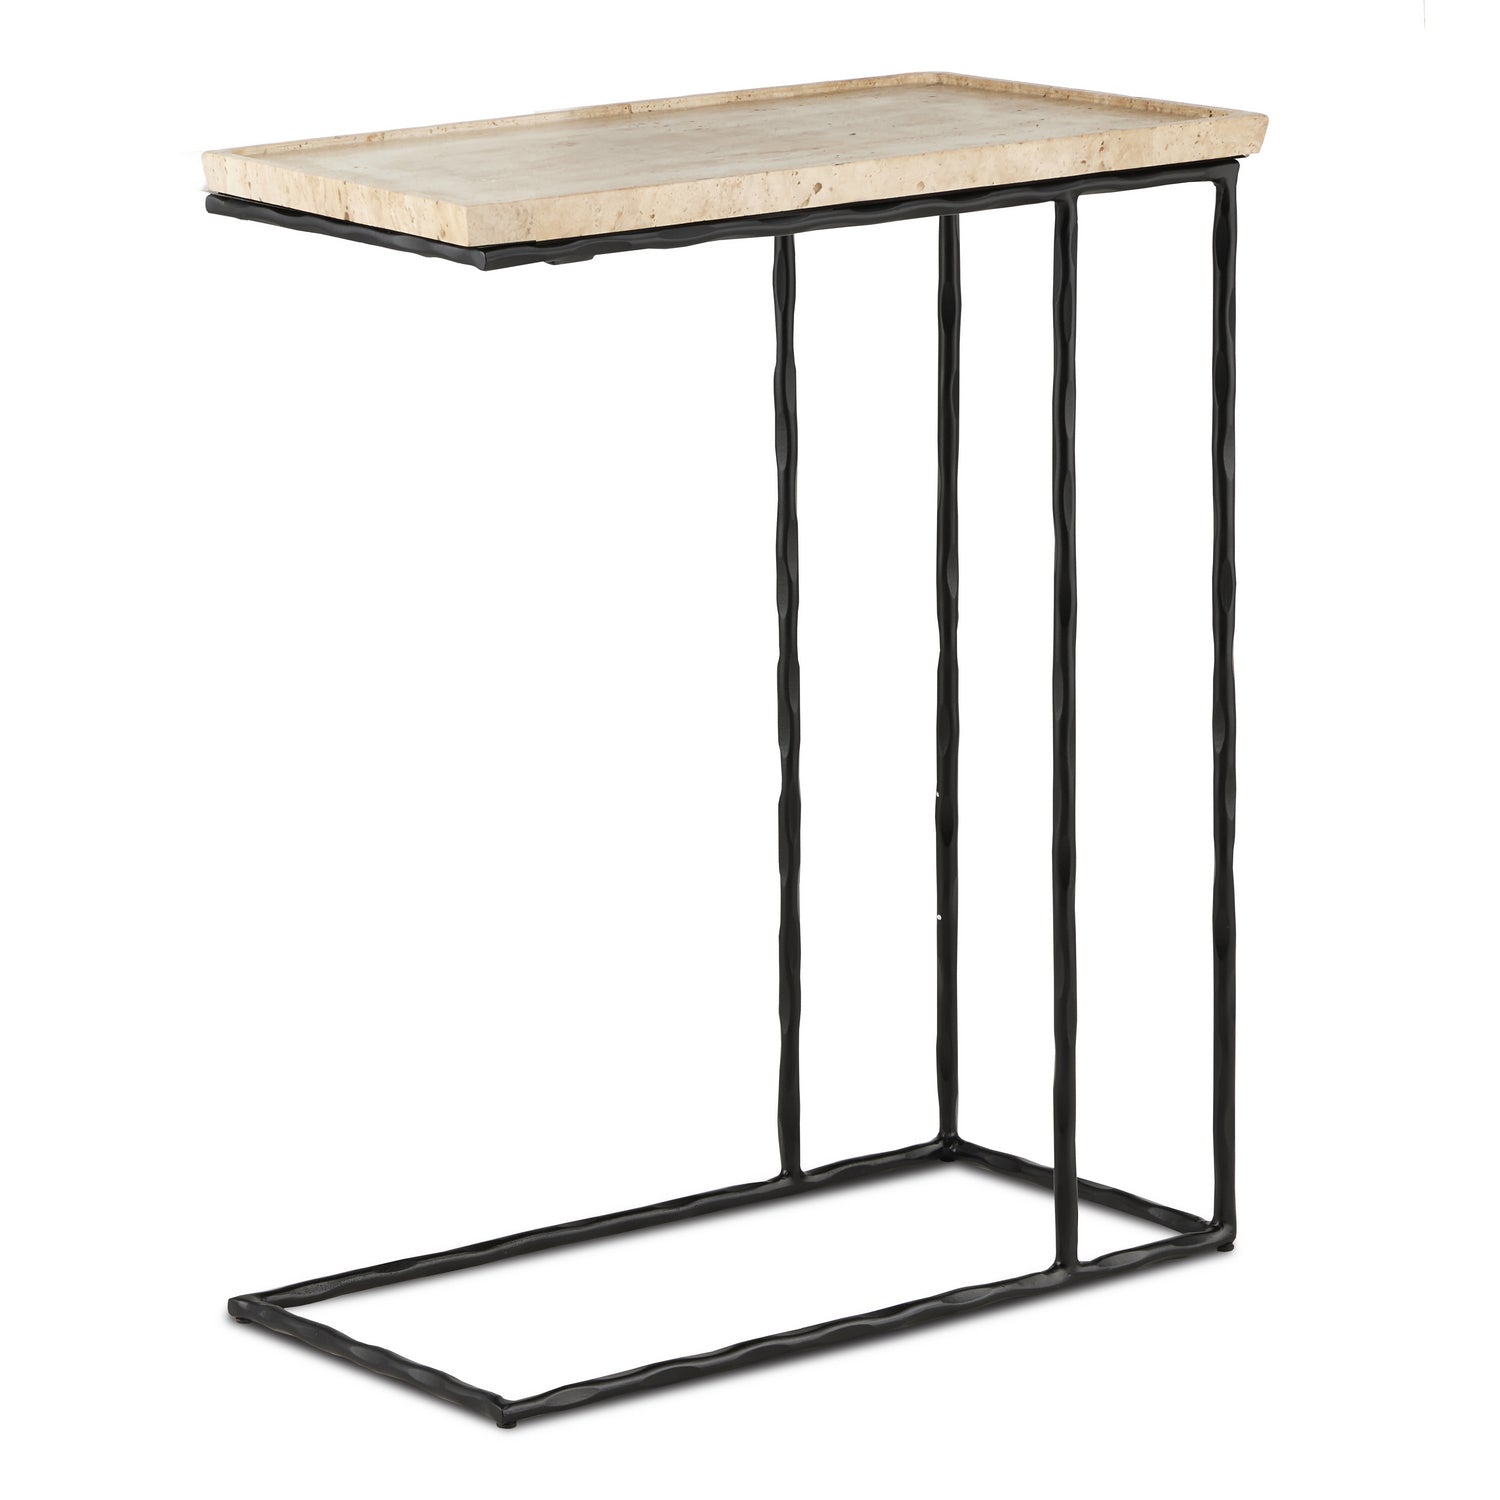 Table from the Boyles collection in Natural/Black finish